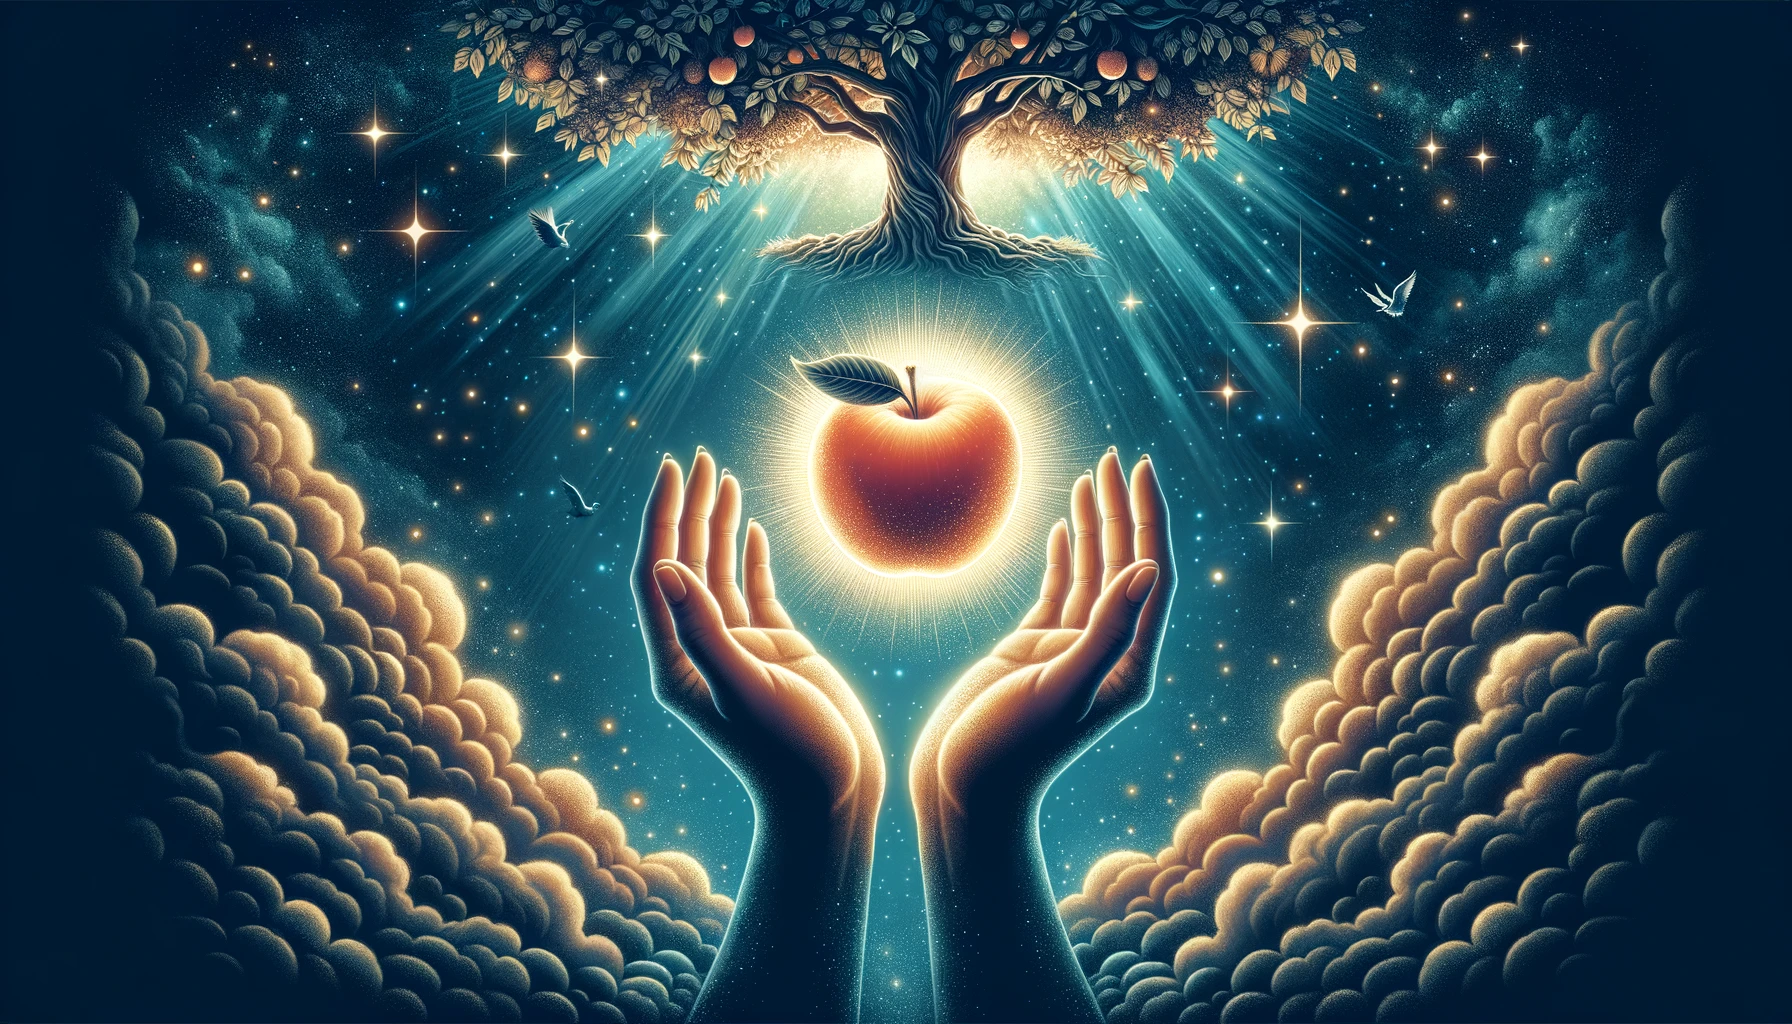 biblical meaning of an apple tree